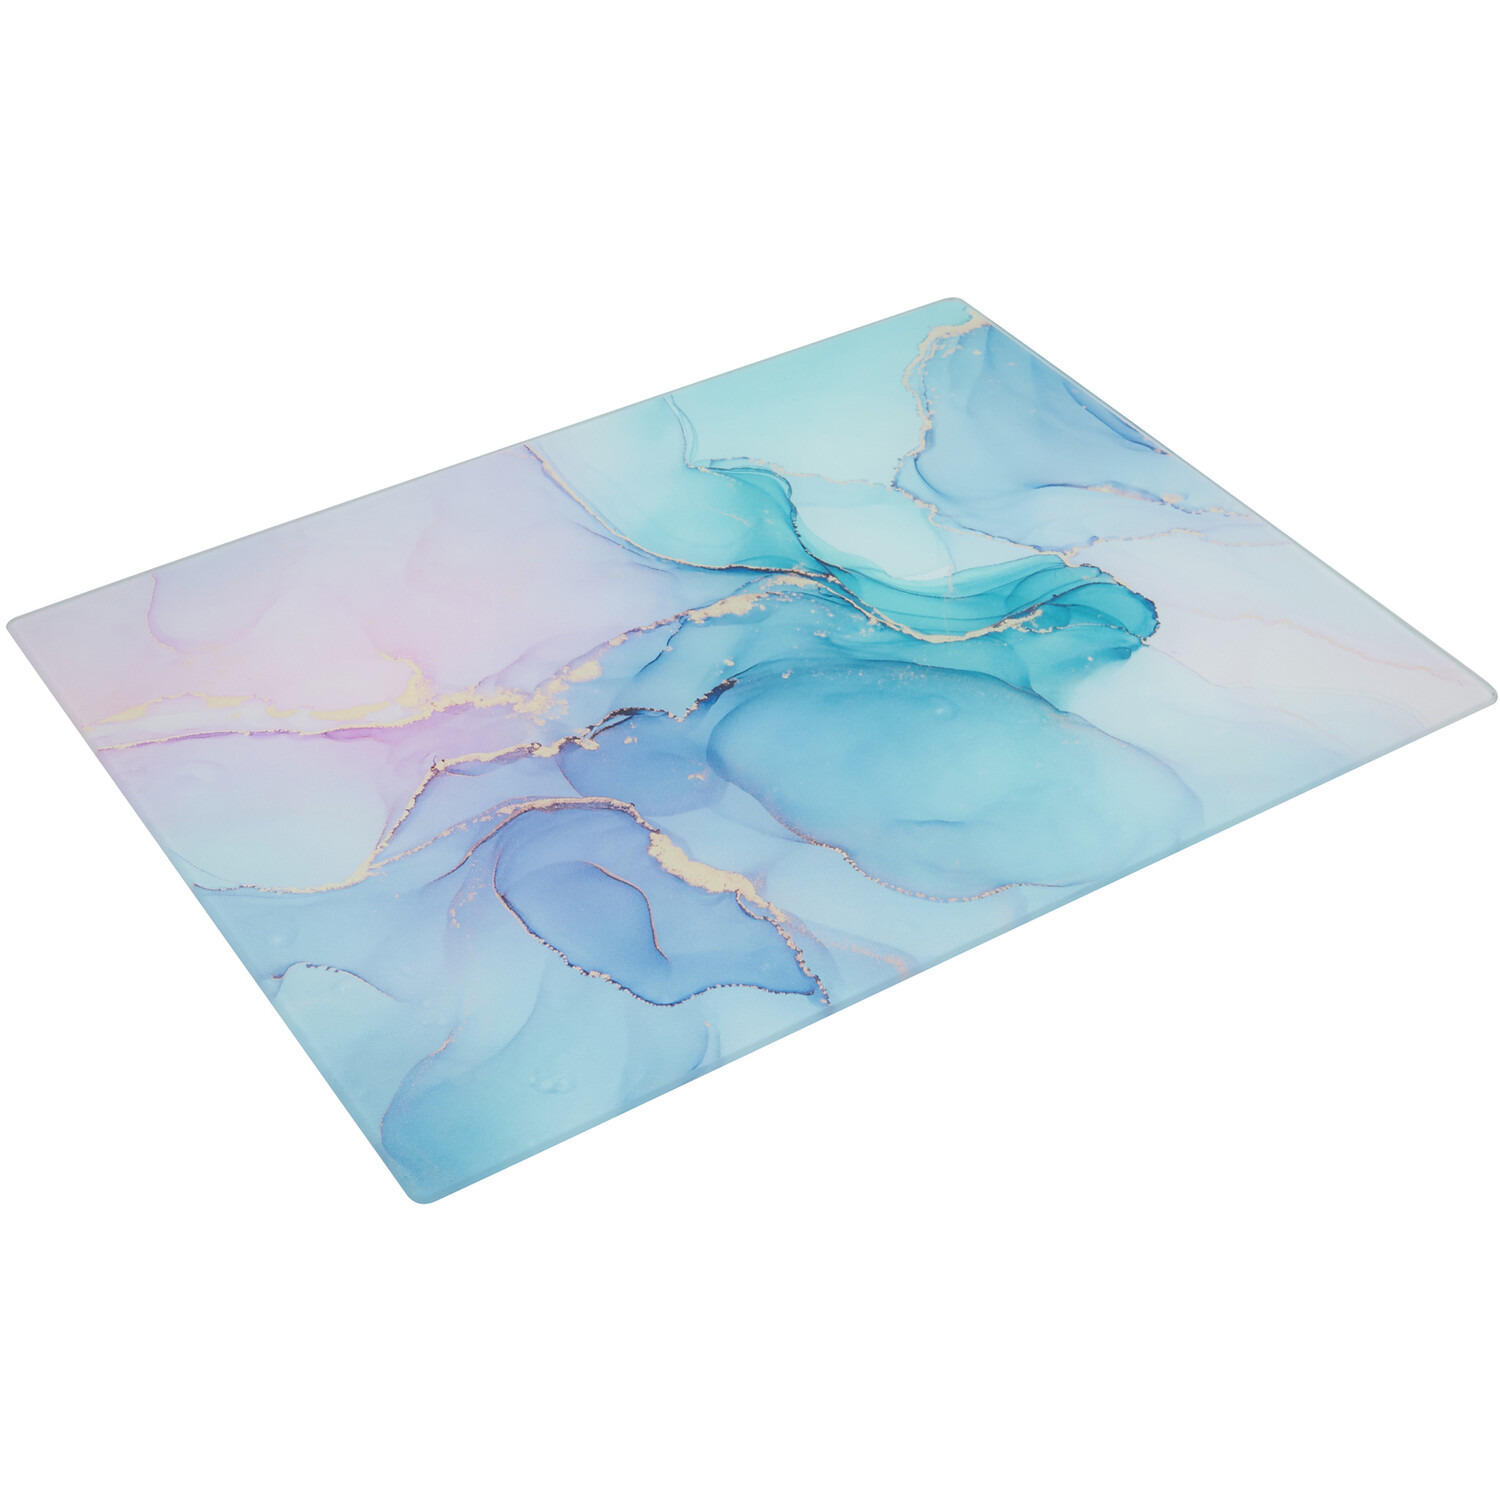 Multicoloured Marble Glass Worktop Saver - Blue Image 1